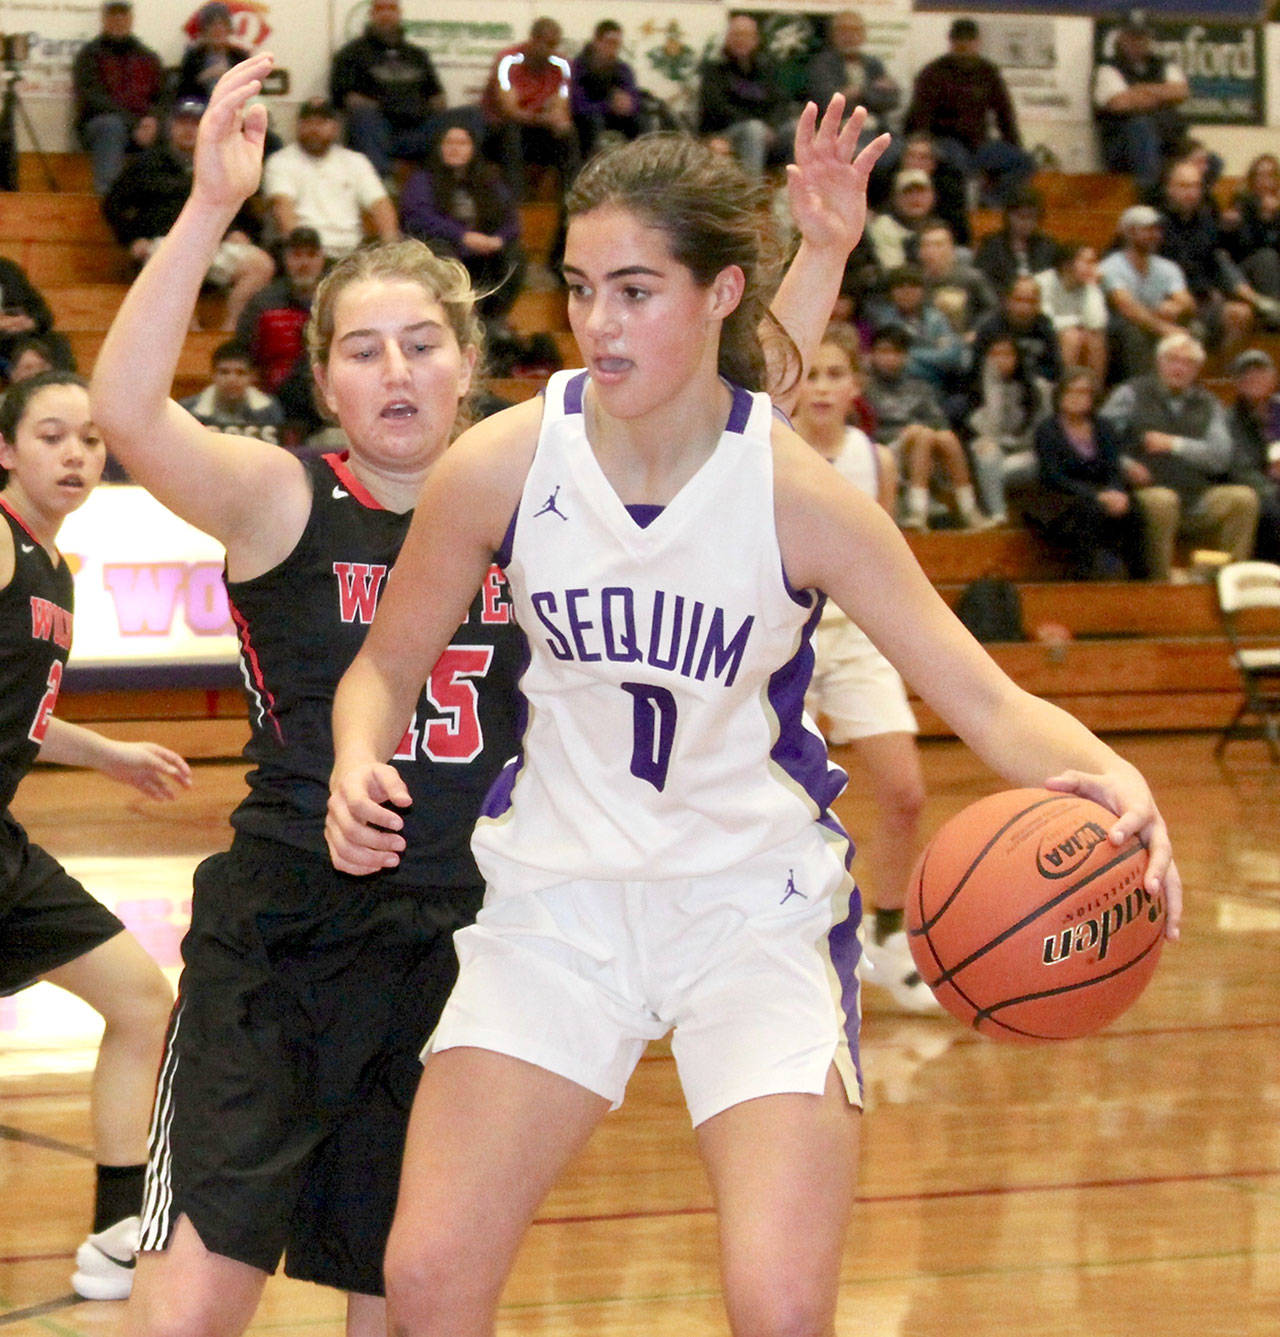 Dave Logan/for Peninsula Daily News Sequim’s Hope Glasser dribbles while defended by Coupeville’s Tia Wurzrainer. The Olympic Peninsula Wolves defeated the Whidbey Island Wolves 50-24.